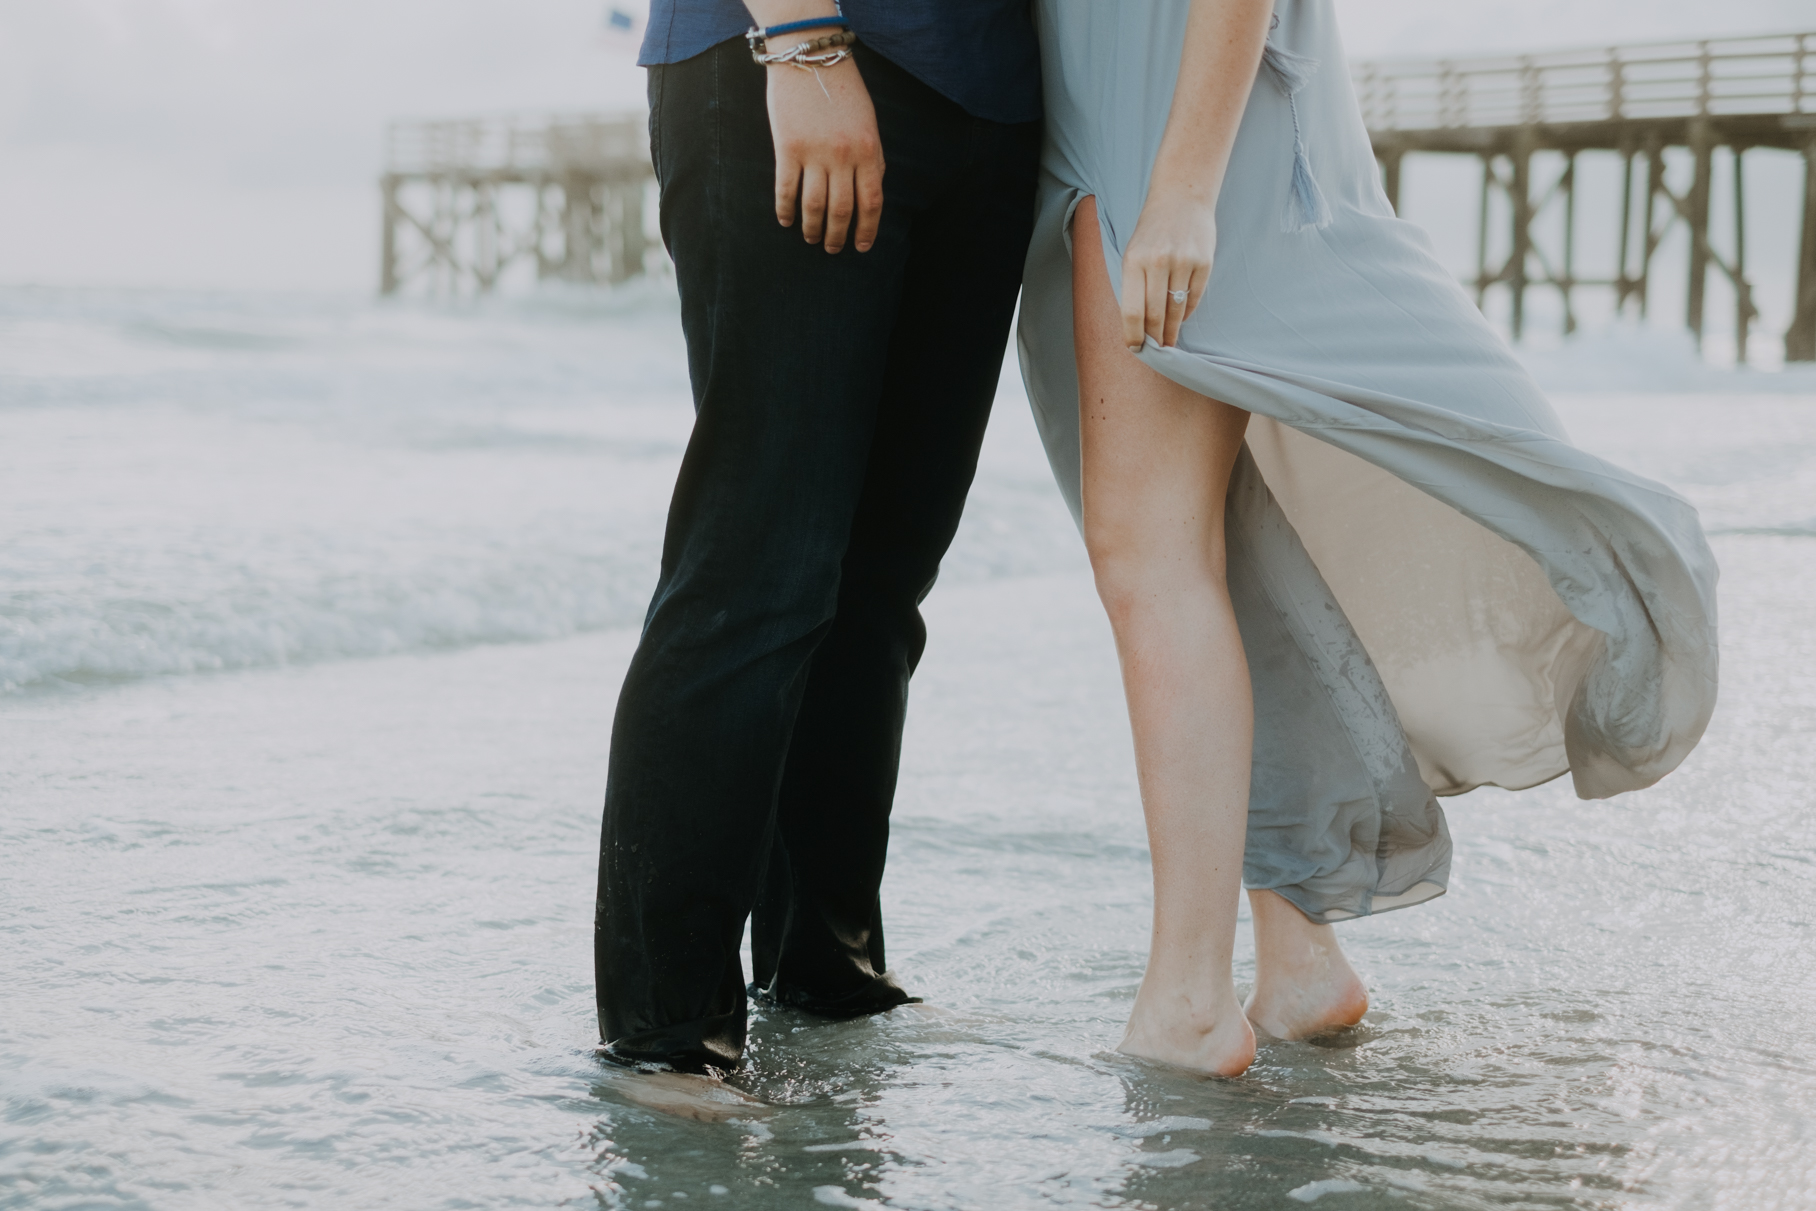 claire + cole | st petersburg engagement | tampa wedding photography and film